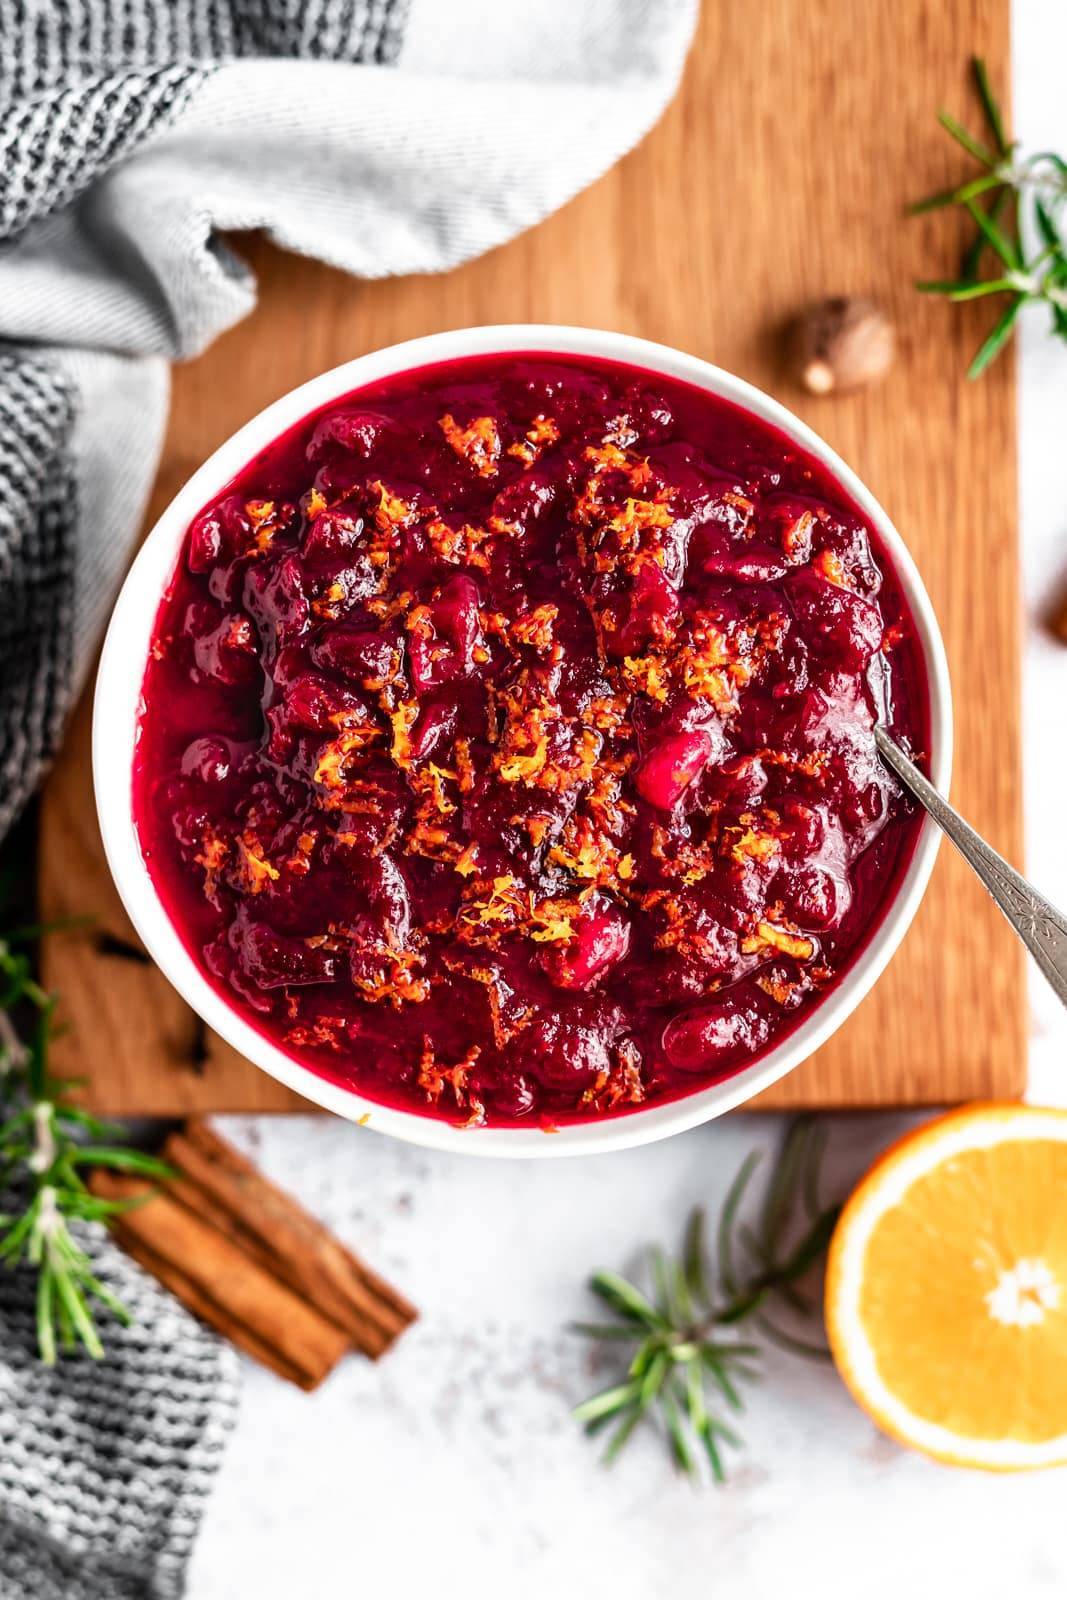 Orange cranberry sauce in a bowl with a spoon.